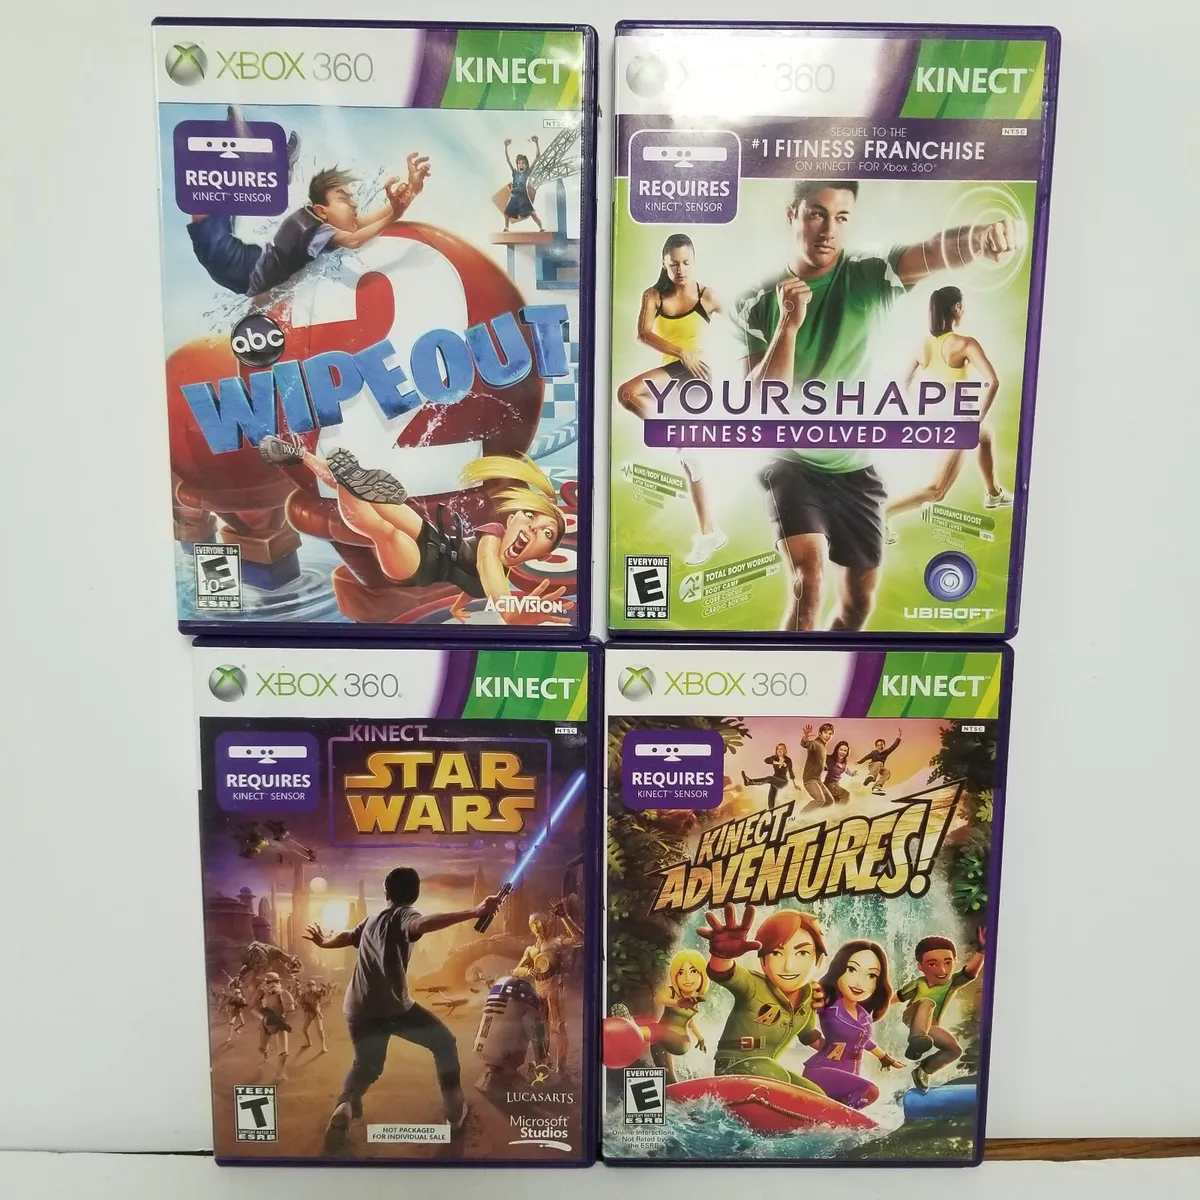 Lot of 4 XBOX 360 kinect games, wipeout, adventures, star wars, your shape.